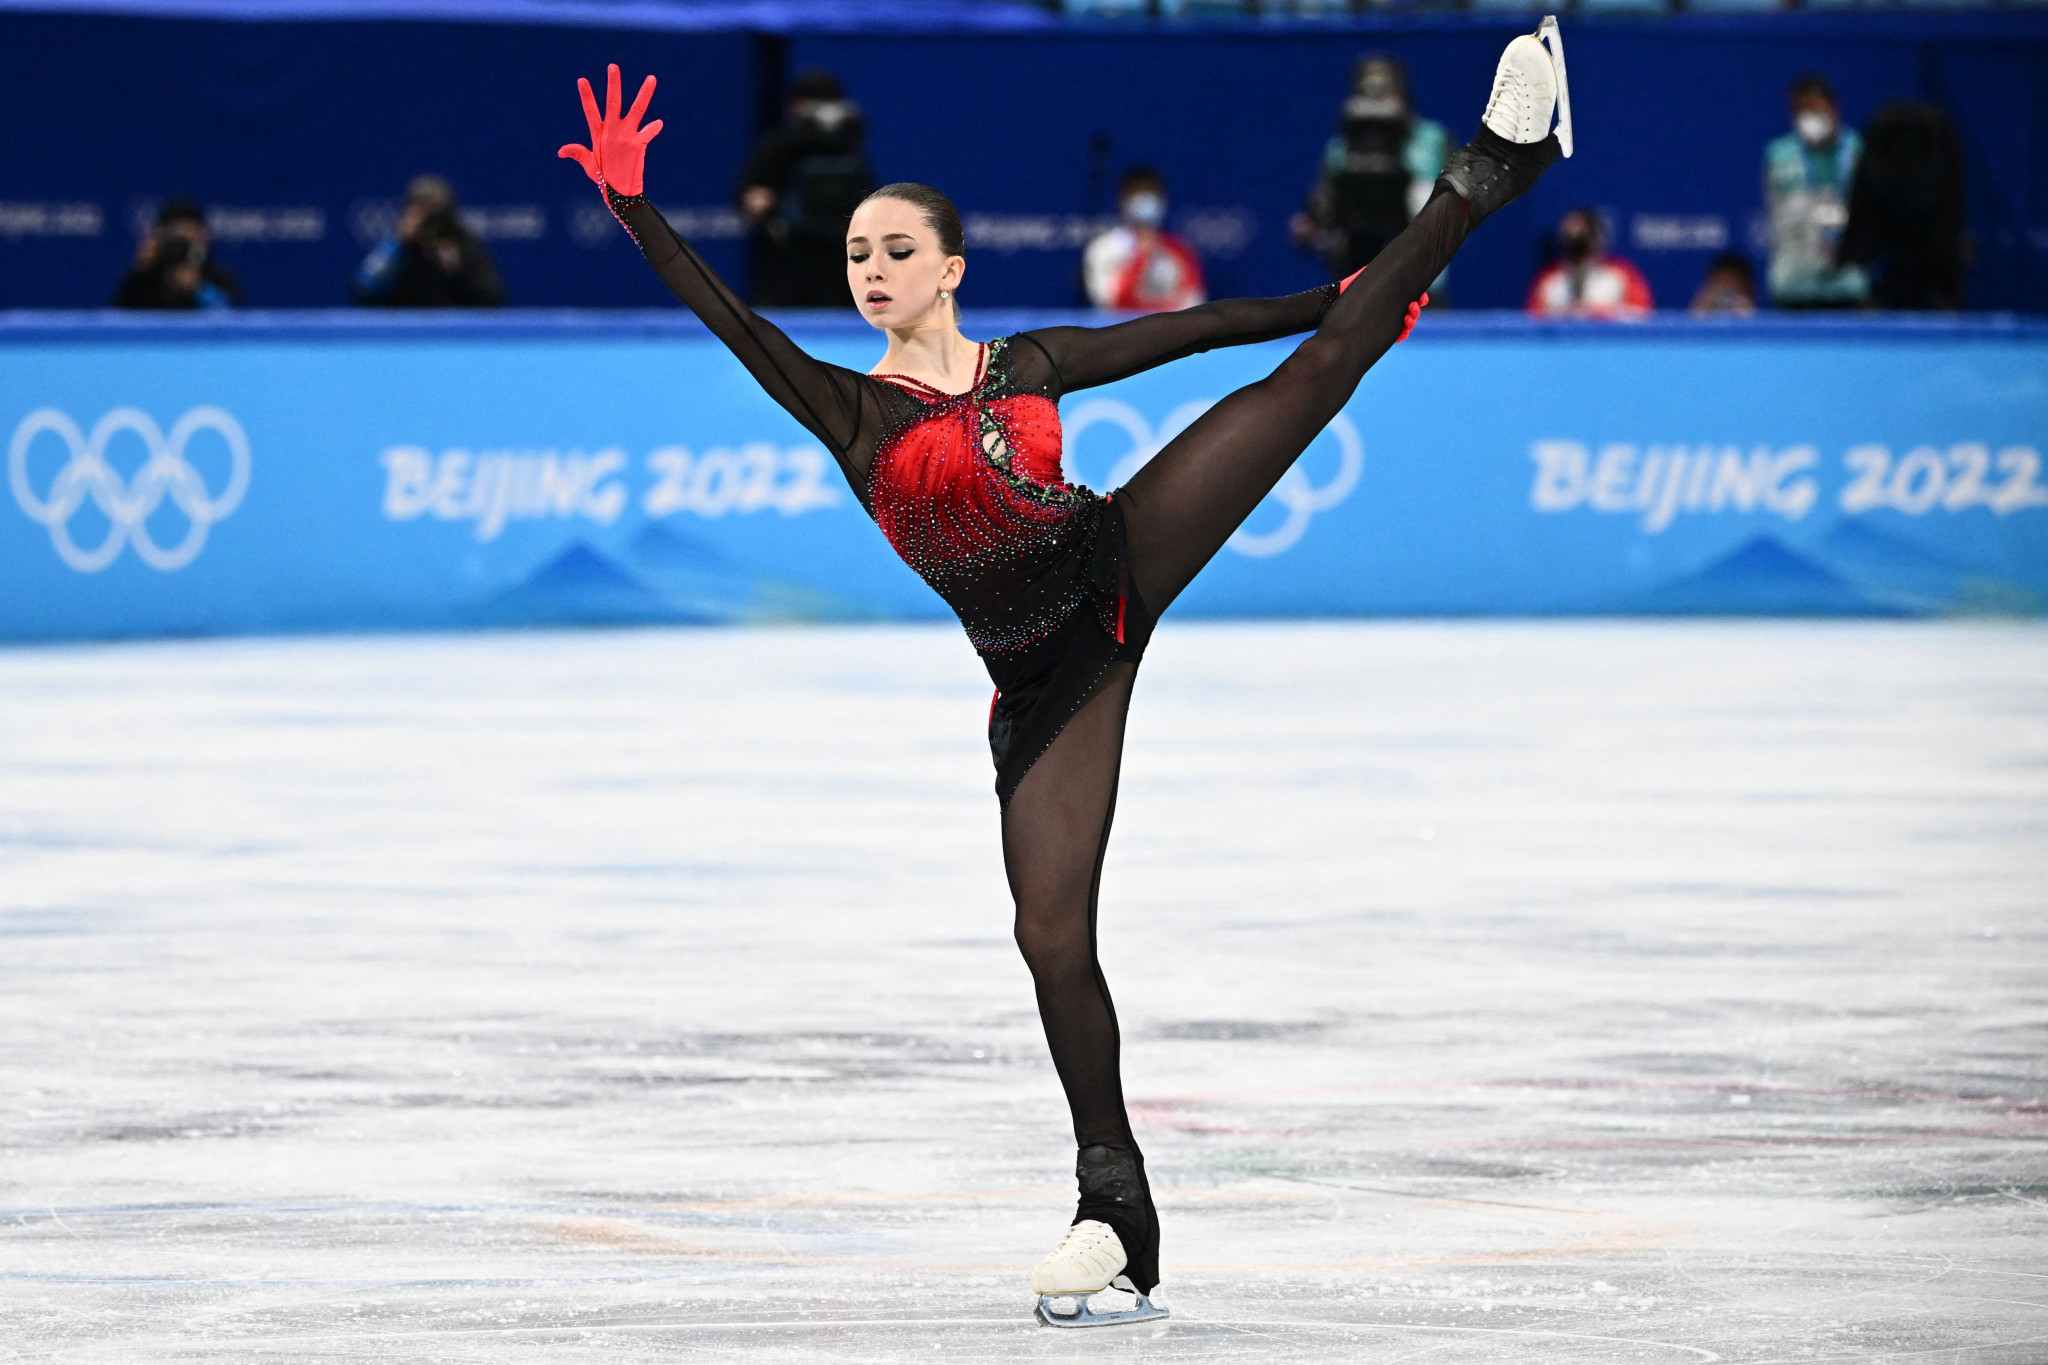 Kamila Valieva helped the Russian Olympic Committee to earn team figure skating gold at Beijing 2022, but the medal ceremony has yet to take place because of the ongoing doping case ©Getty Images